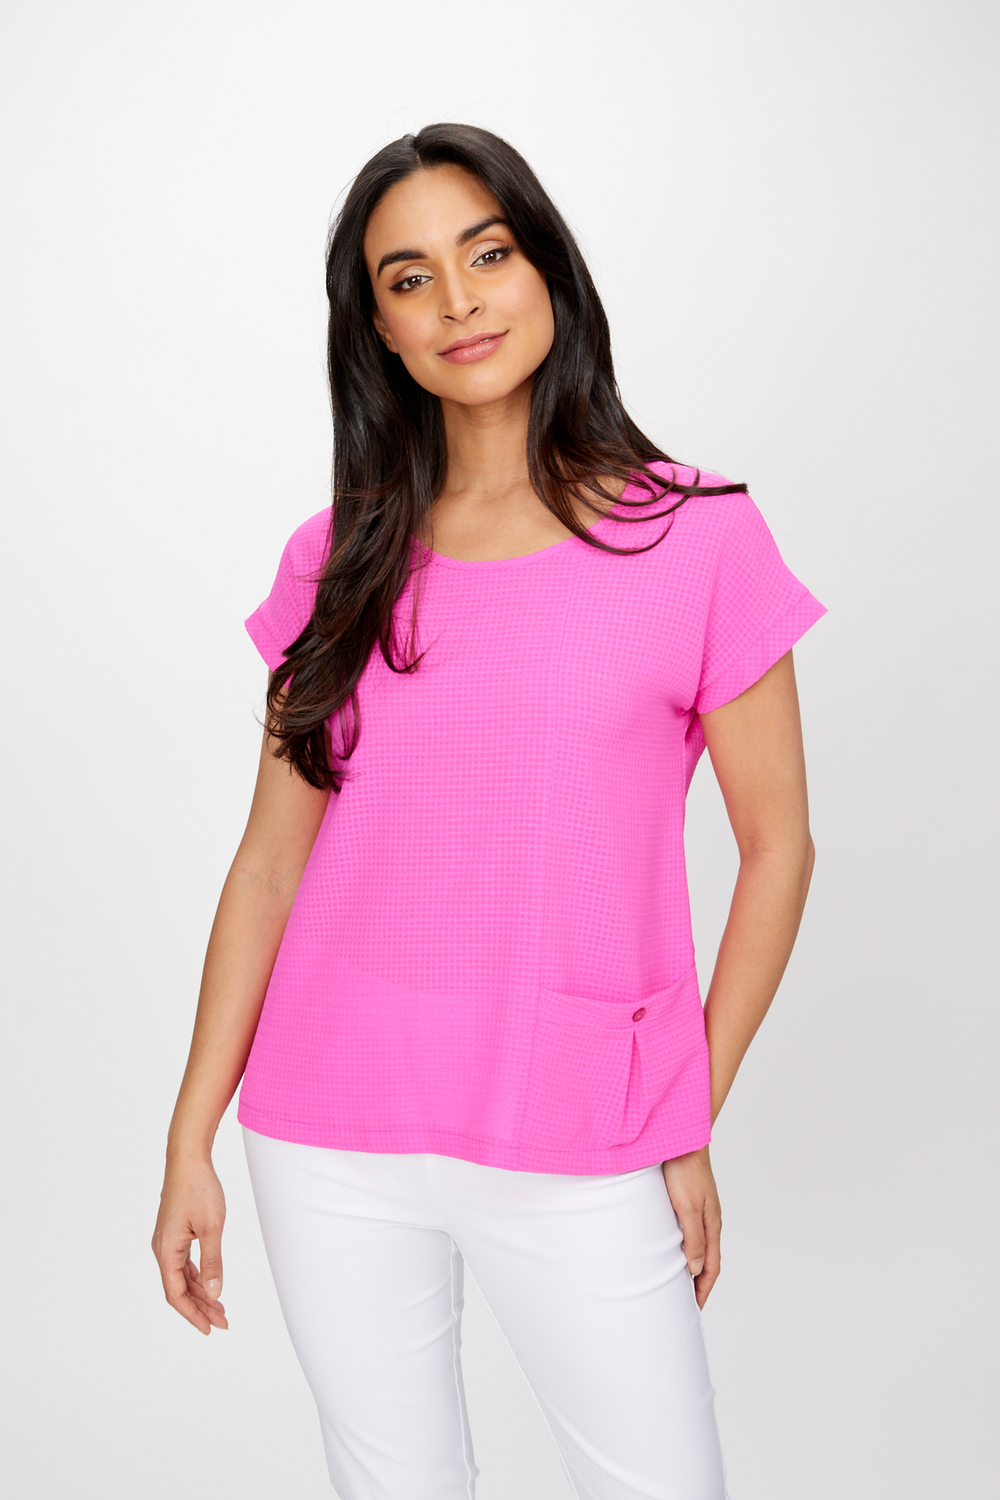 Textured & Checkered Top Style 241217. Ultra Pink